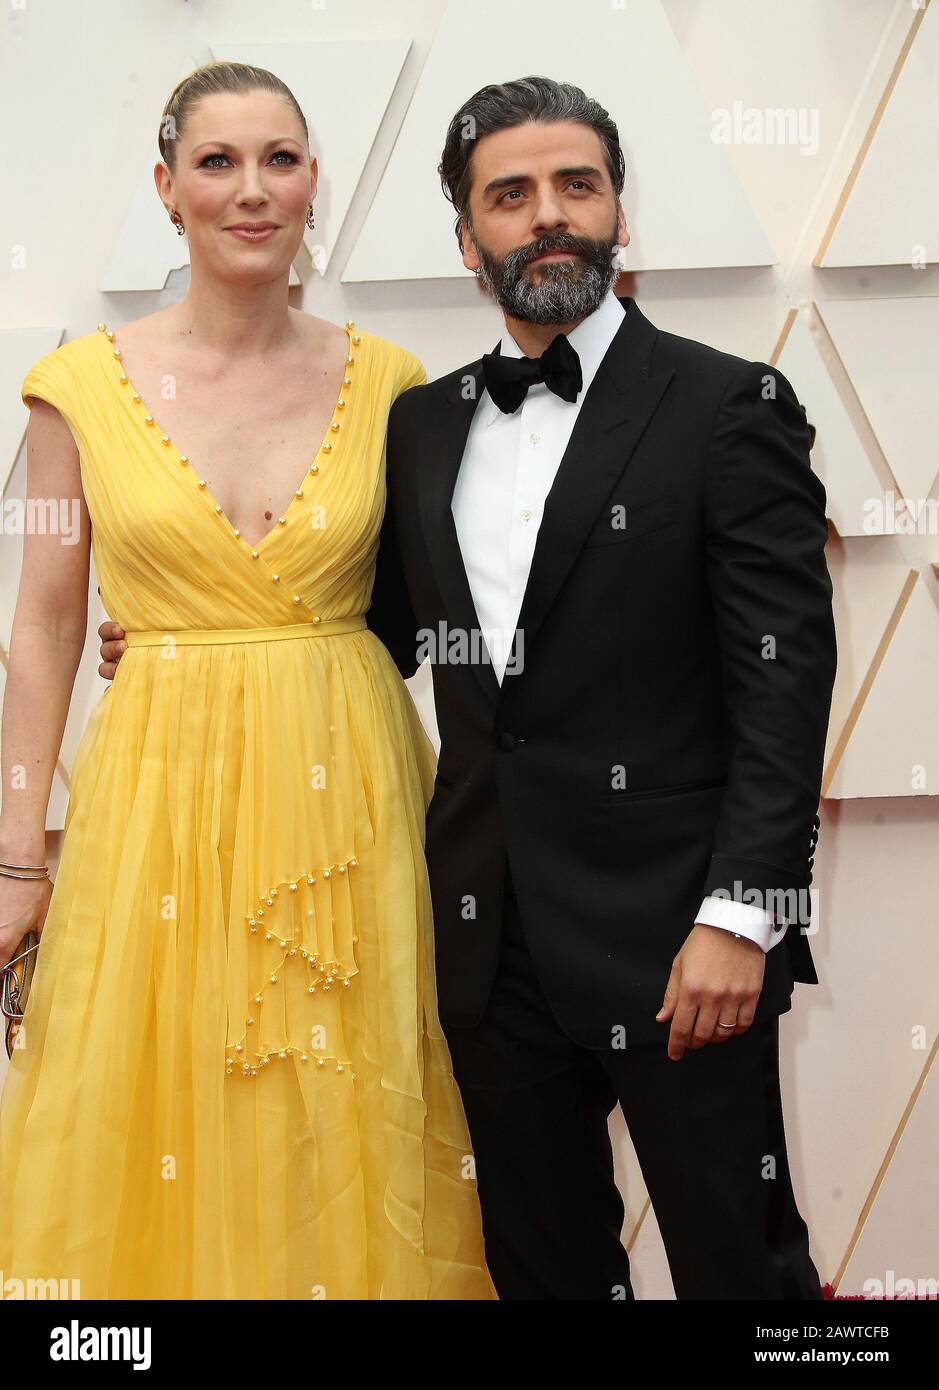 09 February 2020 - Hollywood, California - Elvira Lind, Oscar Isaac. 92nd Annual Academy Awards presented by the Academy of Motion Picture Arts and Sciences held at Hollywood & Highland Center. (Credit Image: © AdMedia via ZUMA Wire) Stock Photo